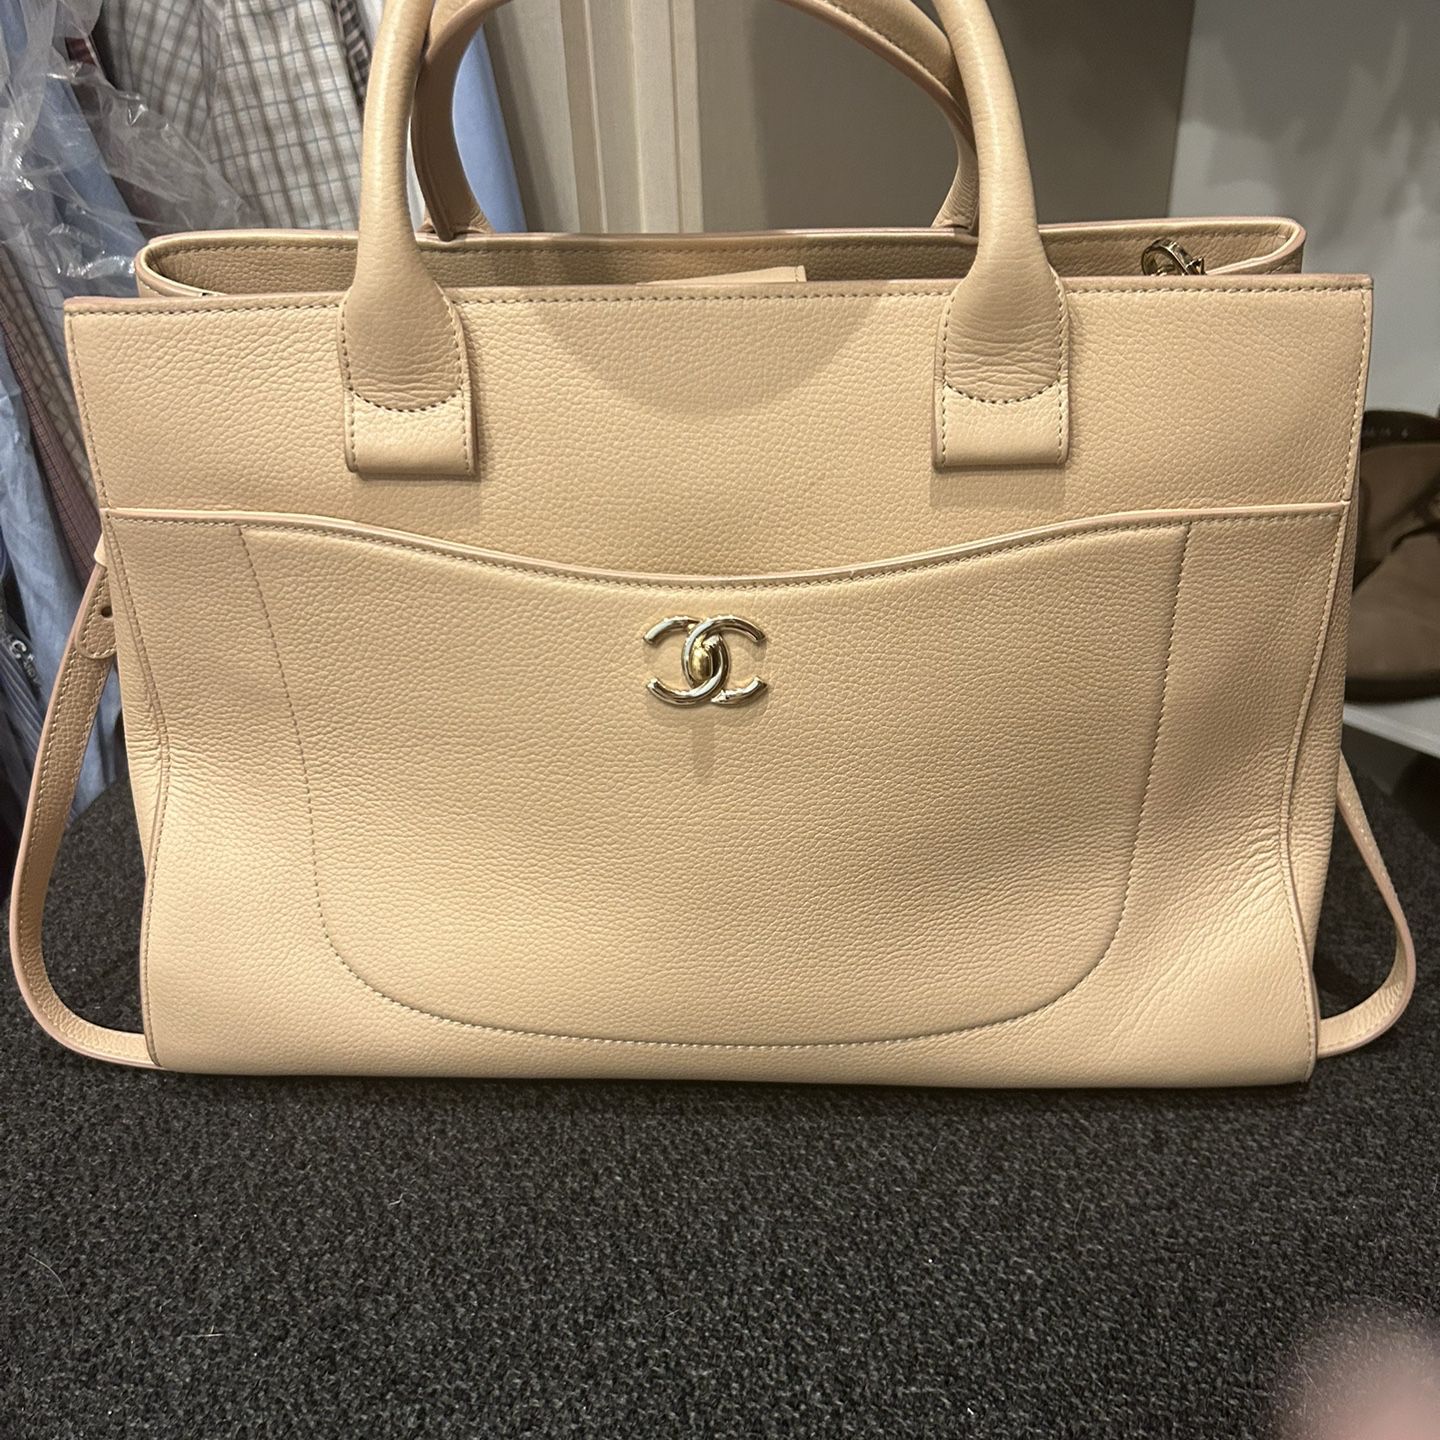 Authentic Chanel tote 